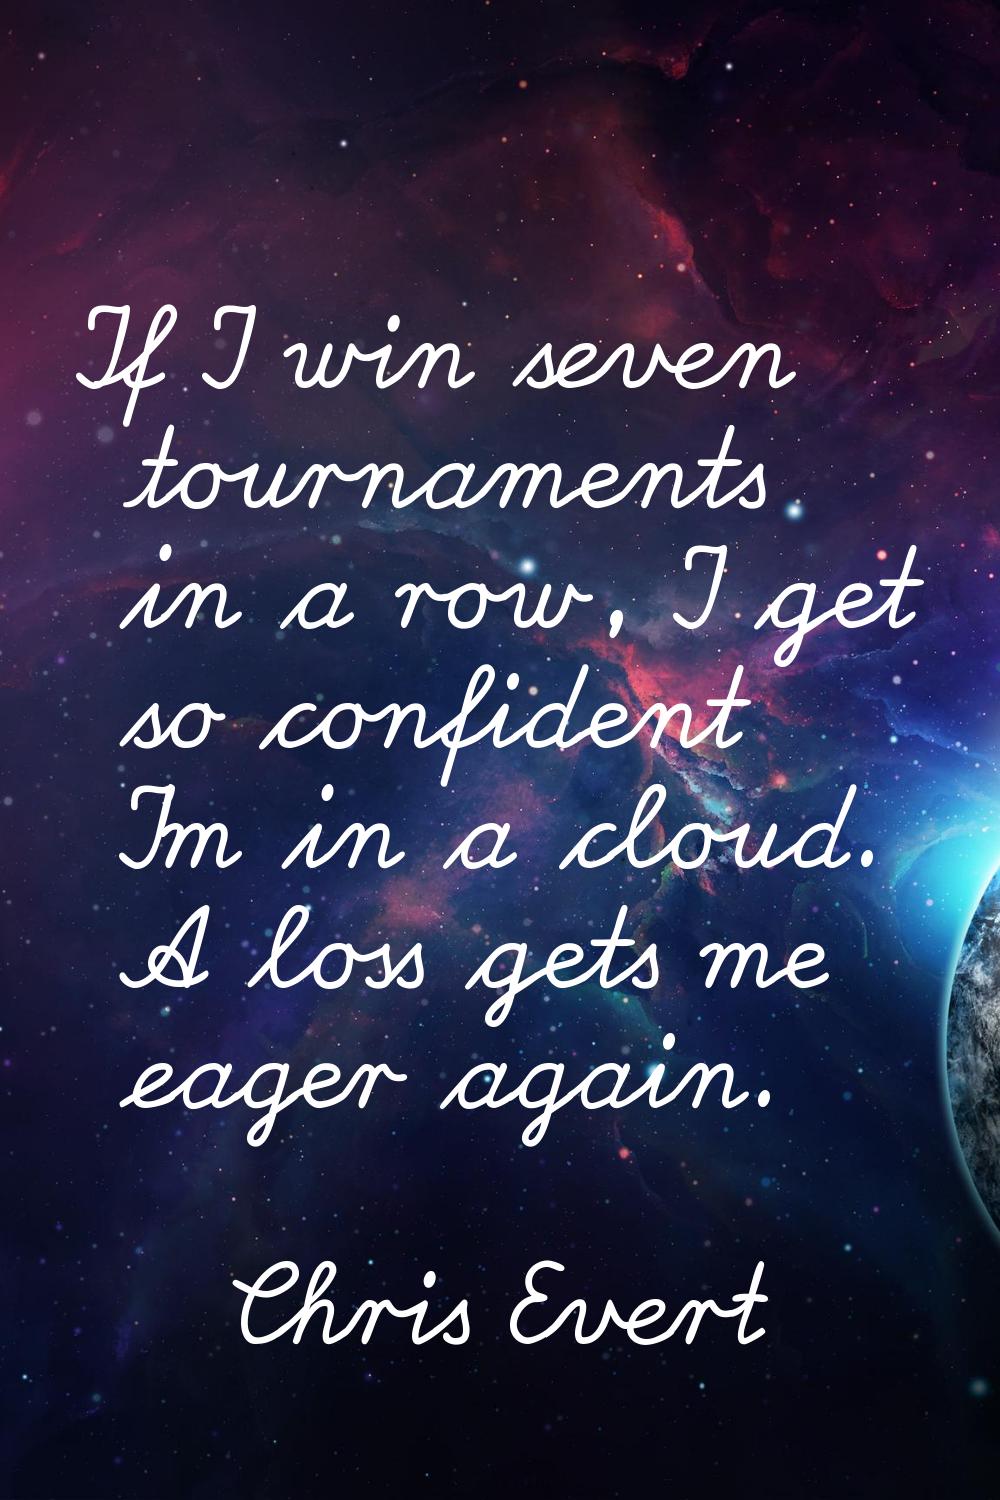 If I win seven tournaments in a row, I get so confident I'm in a cloud. A loss gets me eager again.